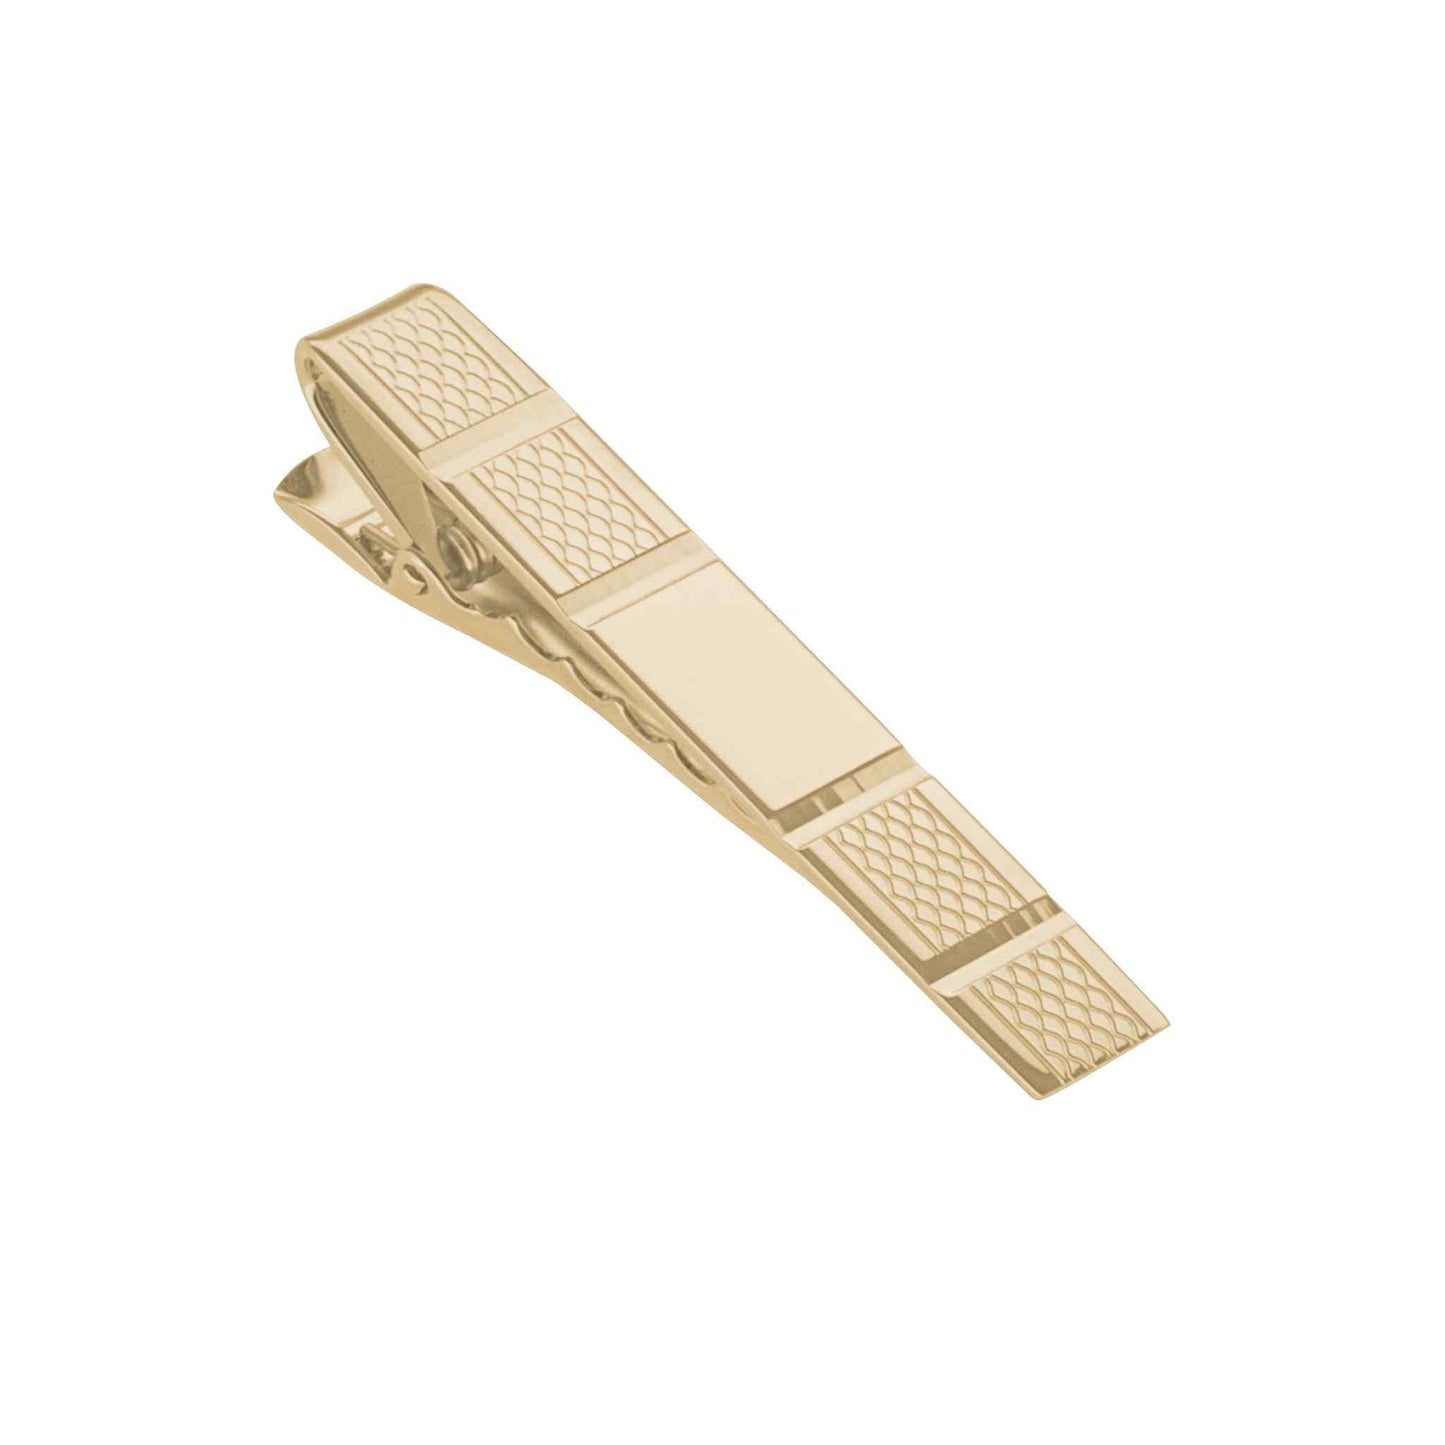 A facet cut tie bar displayed on a neutral white background.